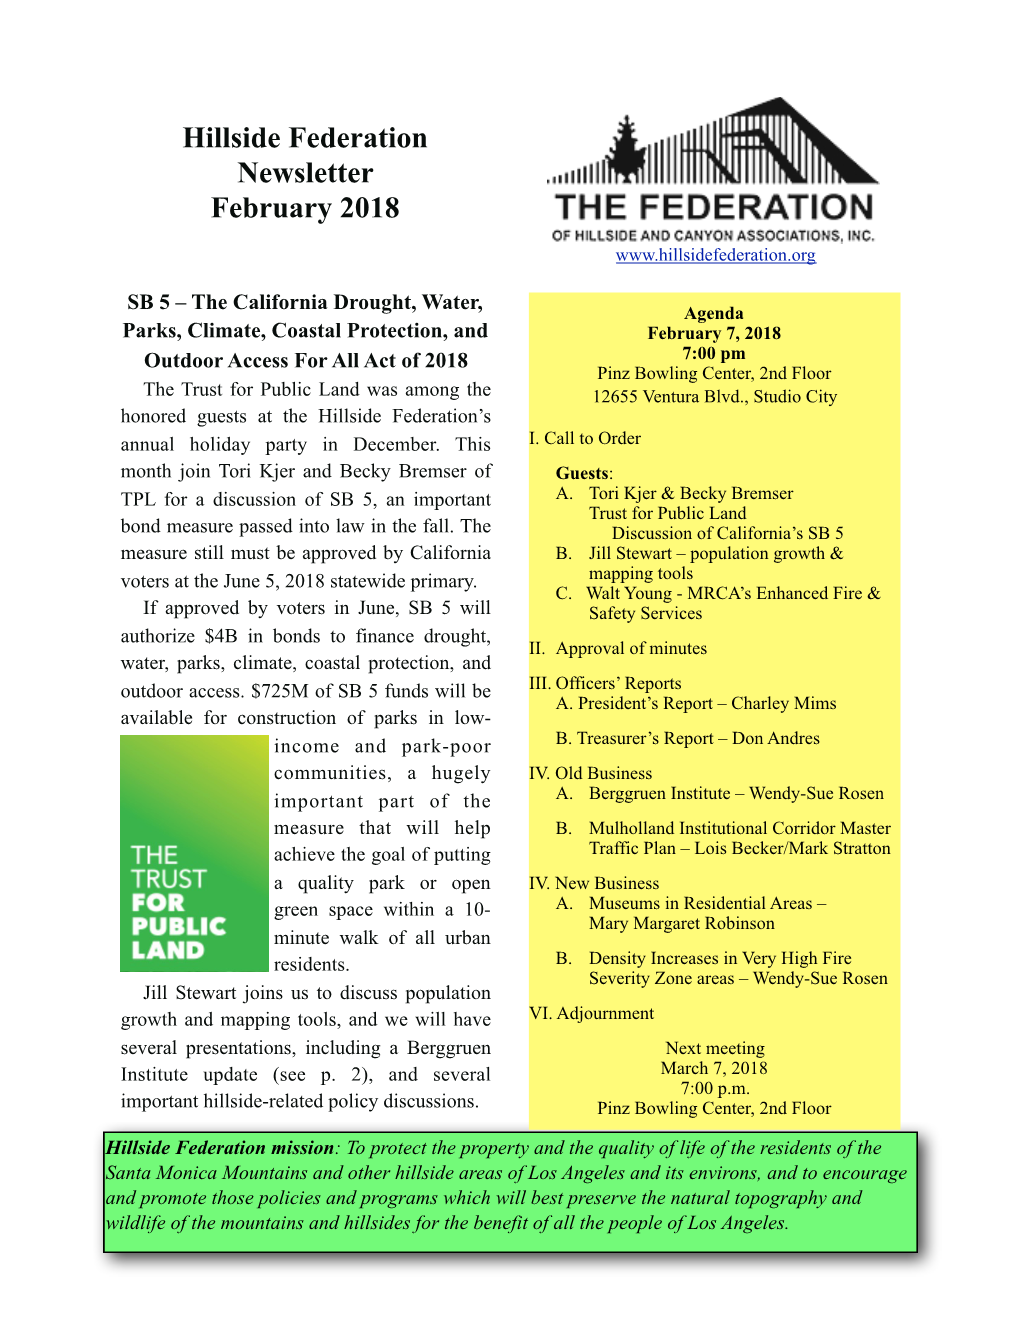 18-2-4 HF DRAFT Feb Newsletter.Pages